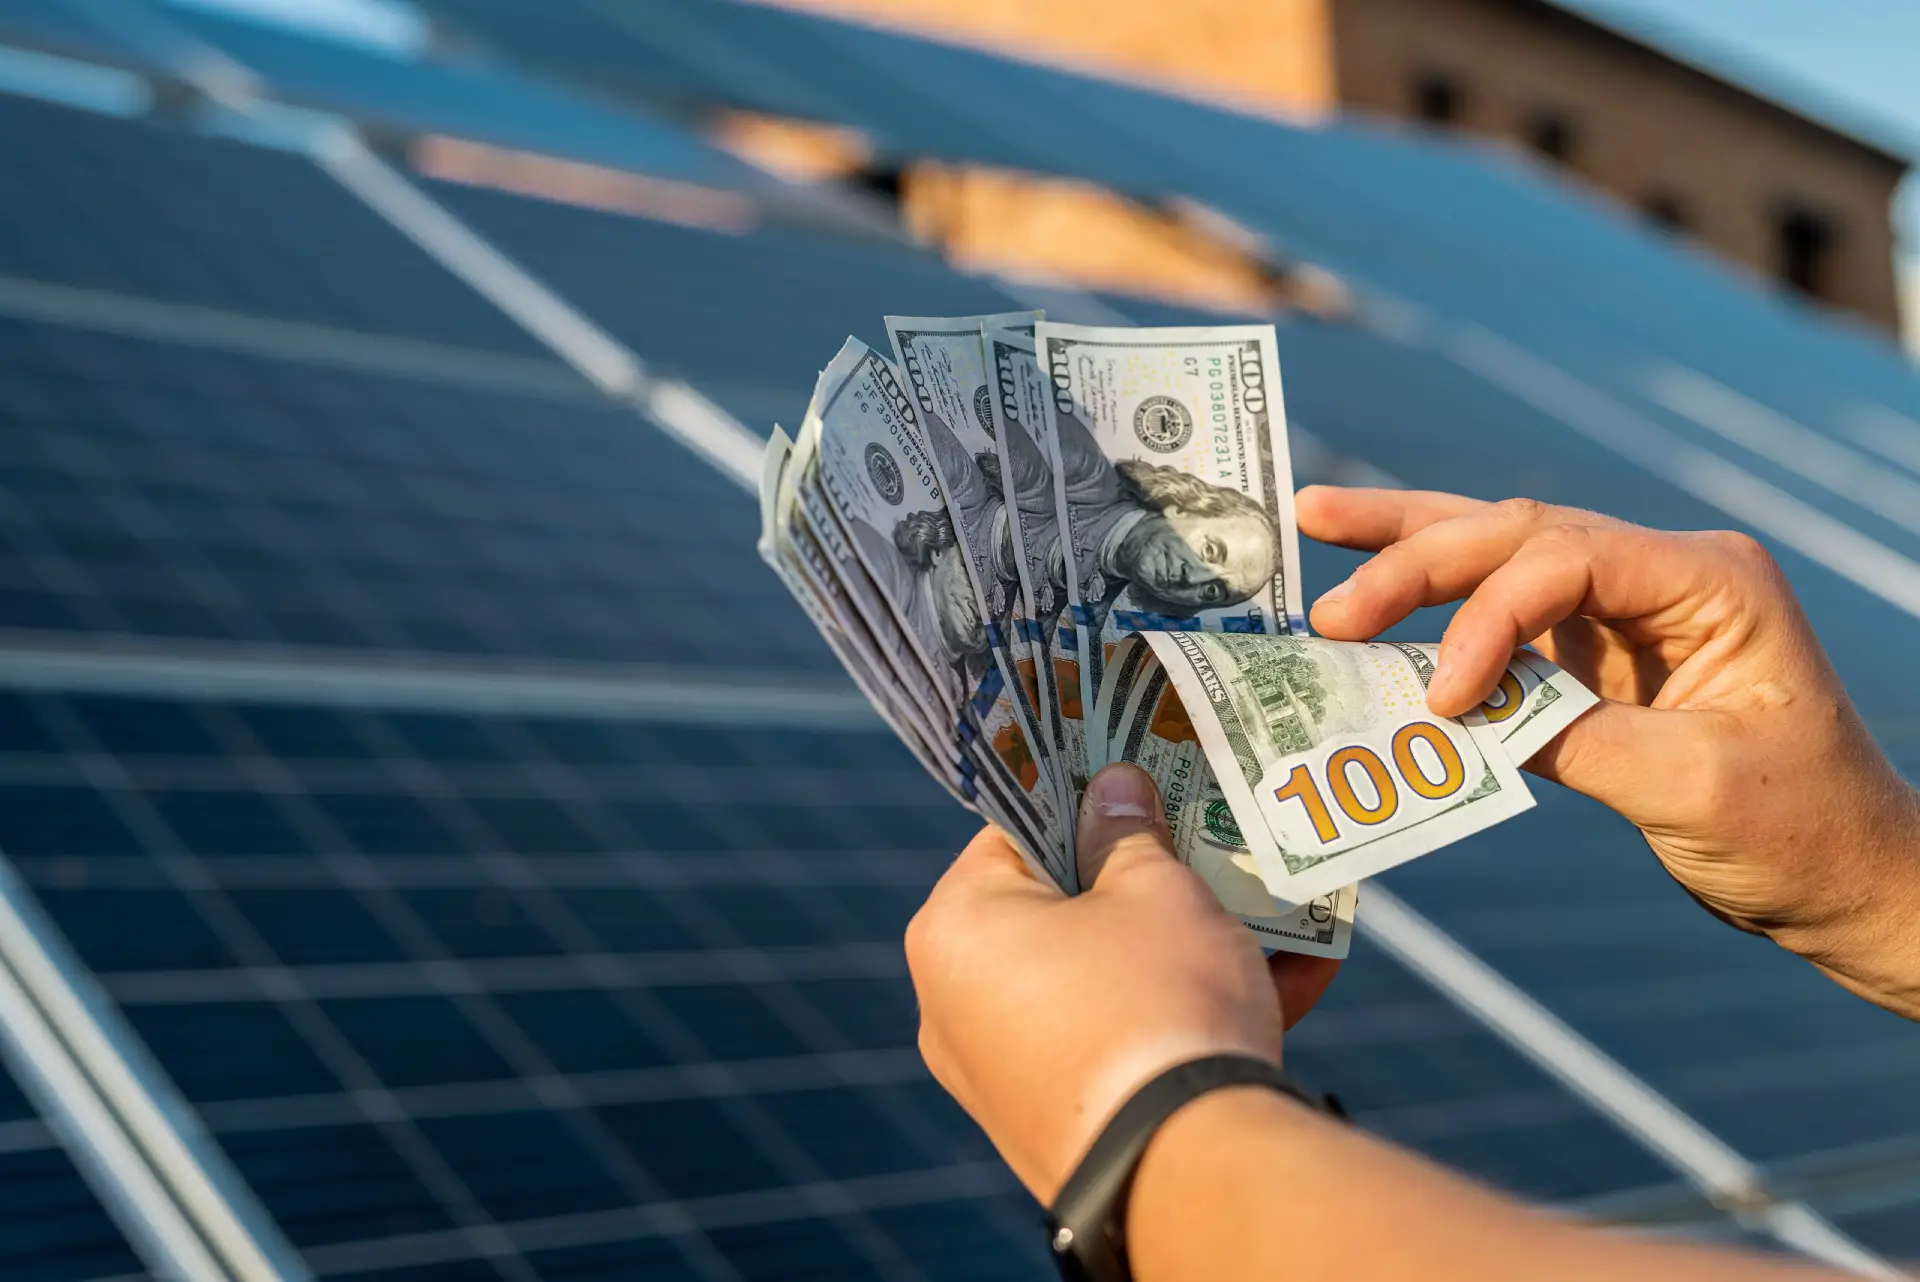 Maximise your return on investment by selling excess solar electricity